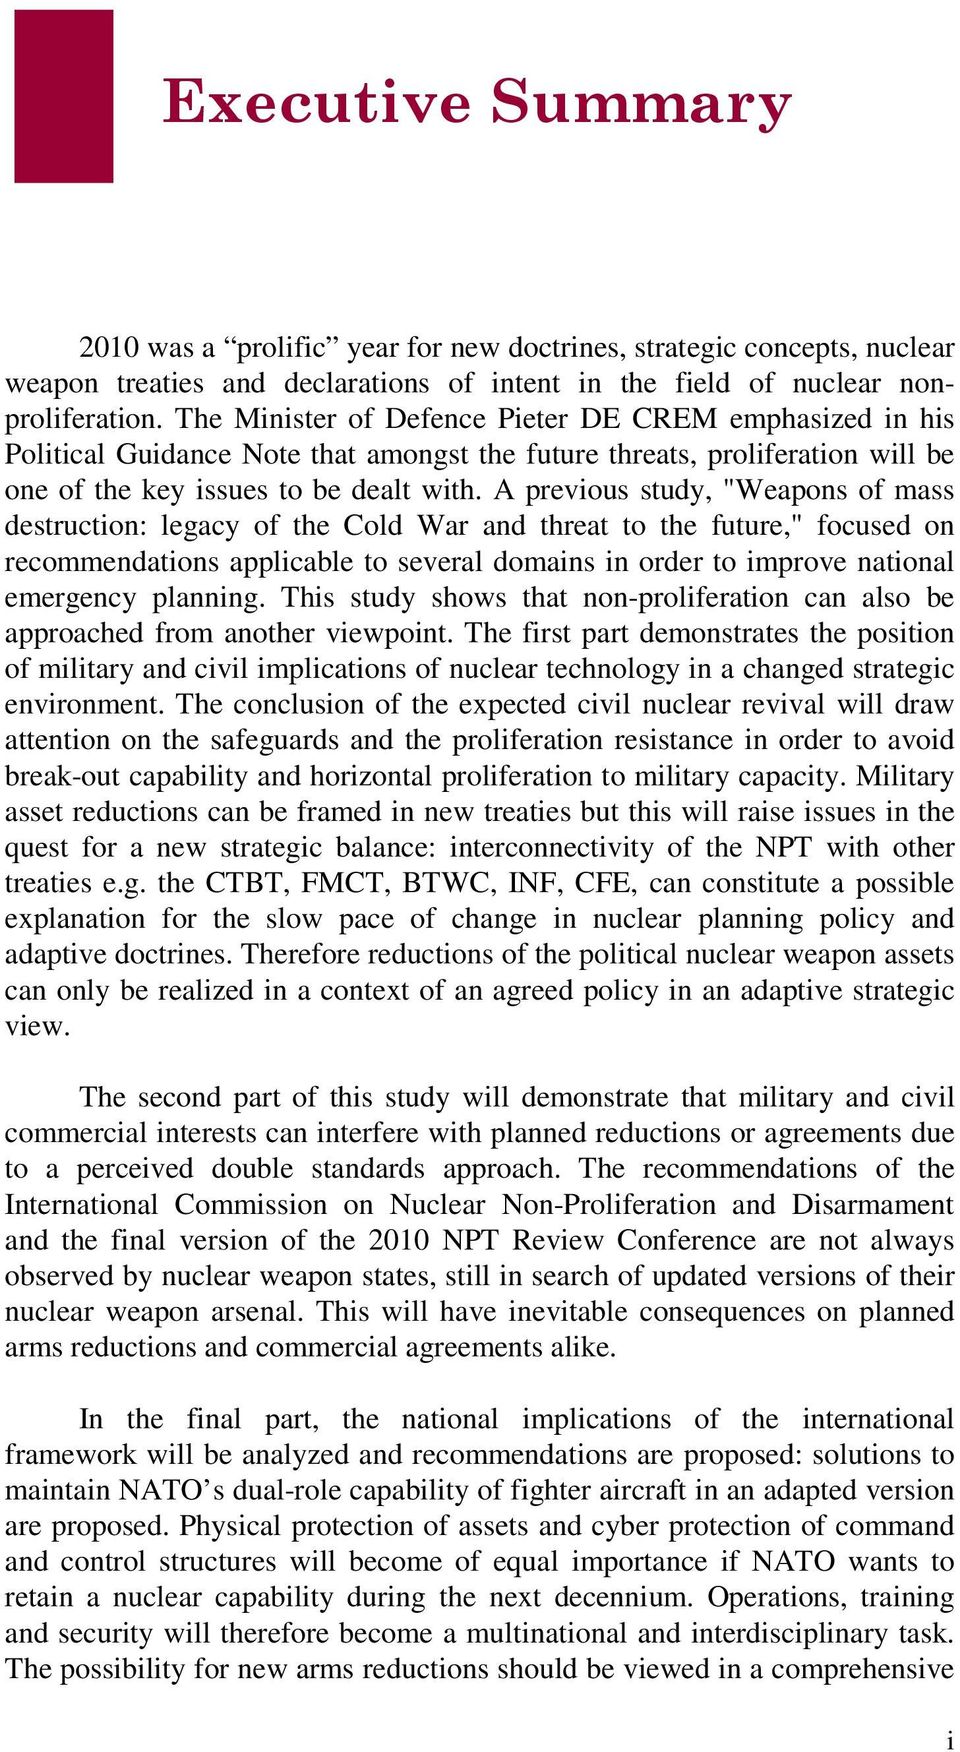 A previous study, "Weapons of mass destruction: legacy of the Cold War and threat to the future," focused on recommendations applicable to several domains in order to improve national emergency